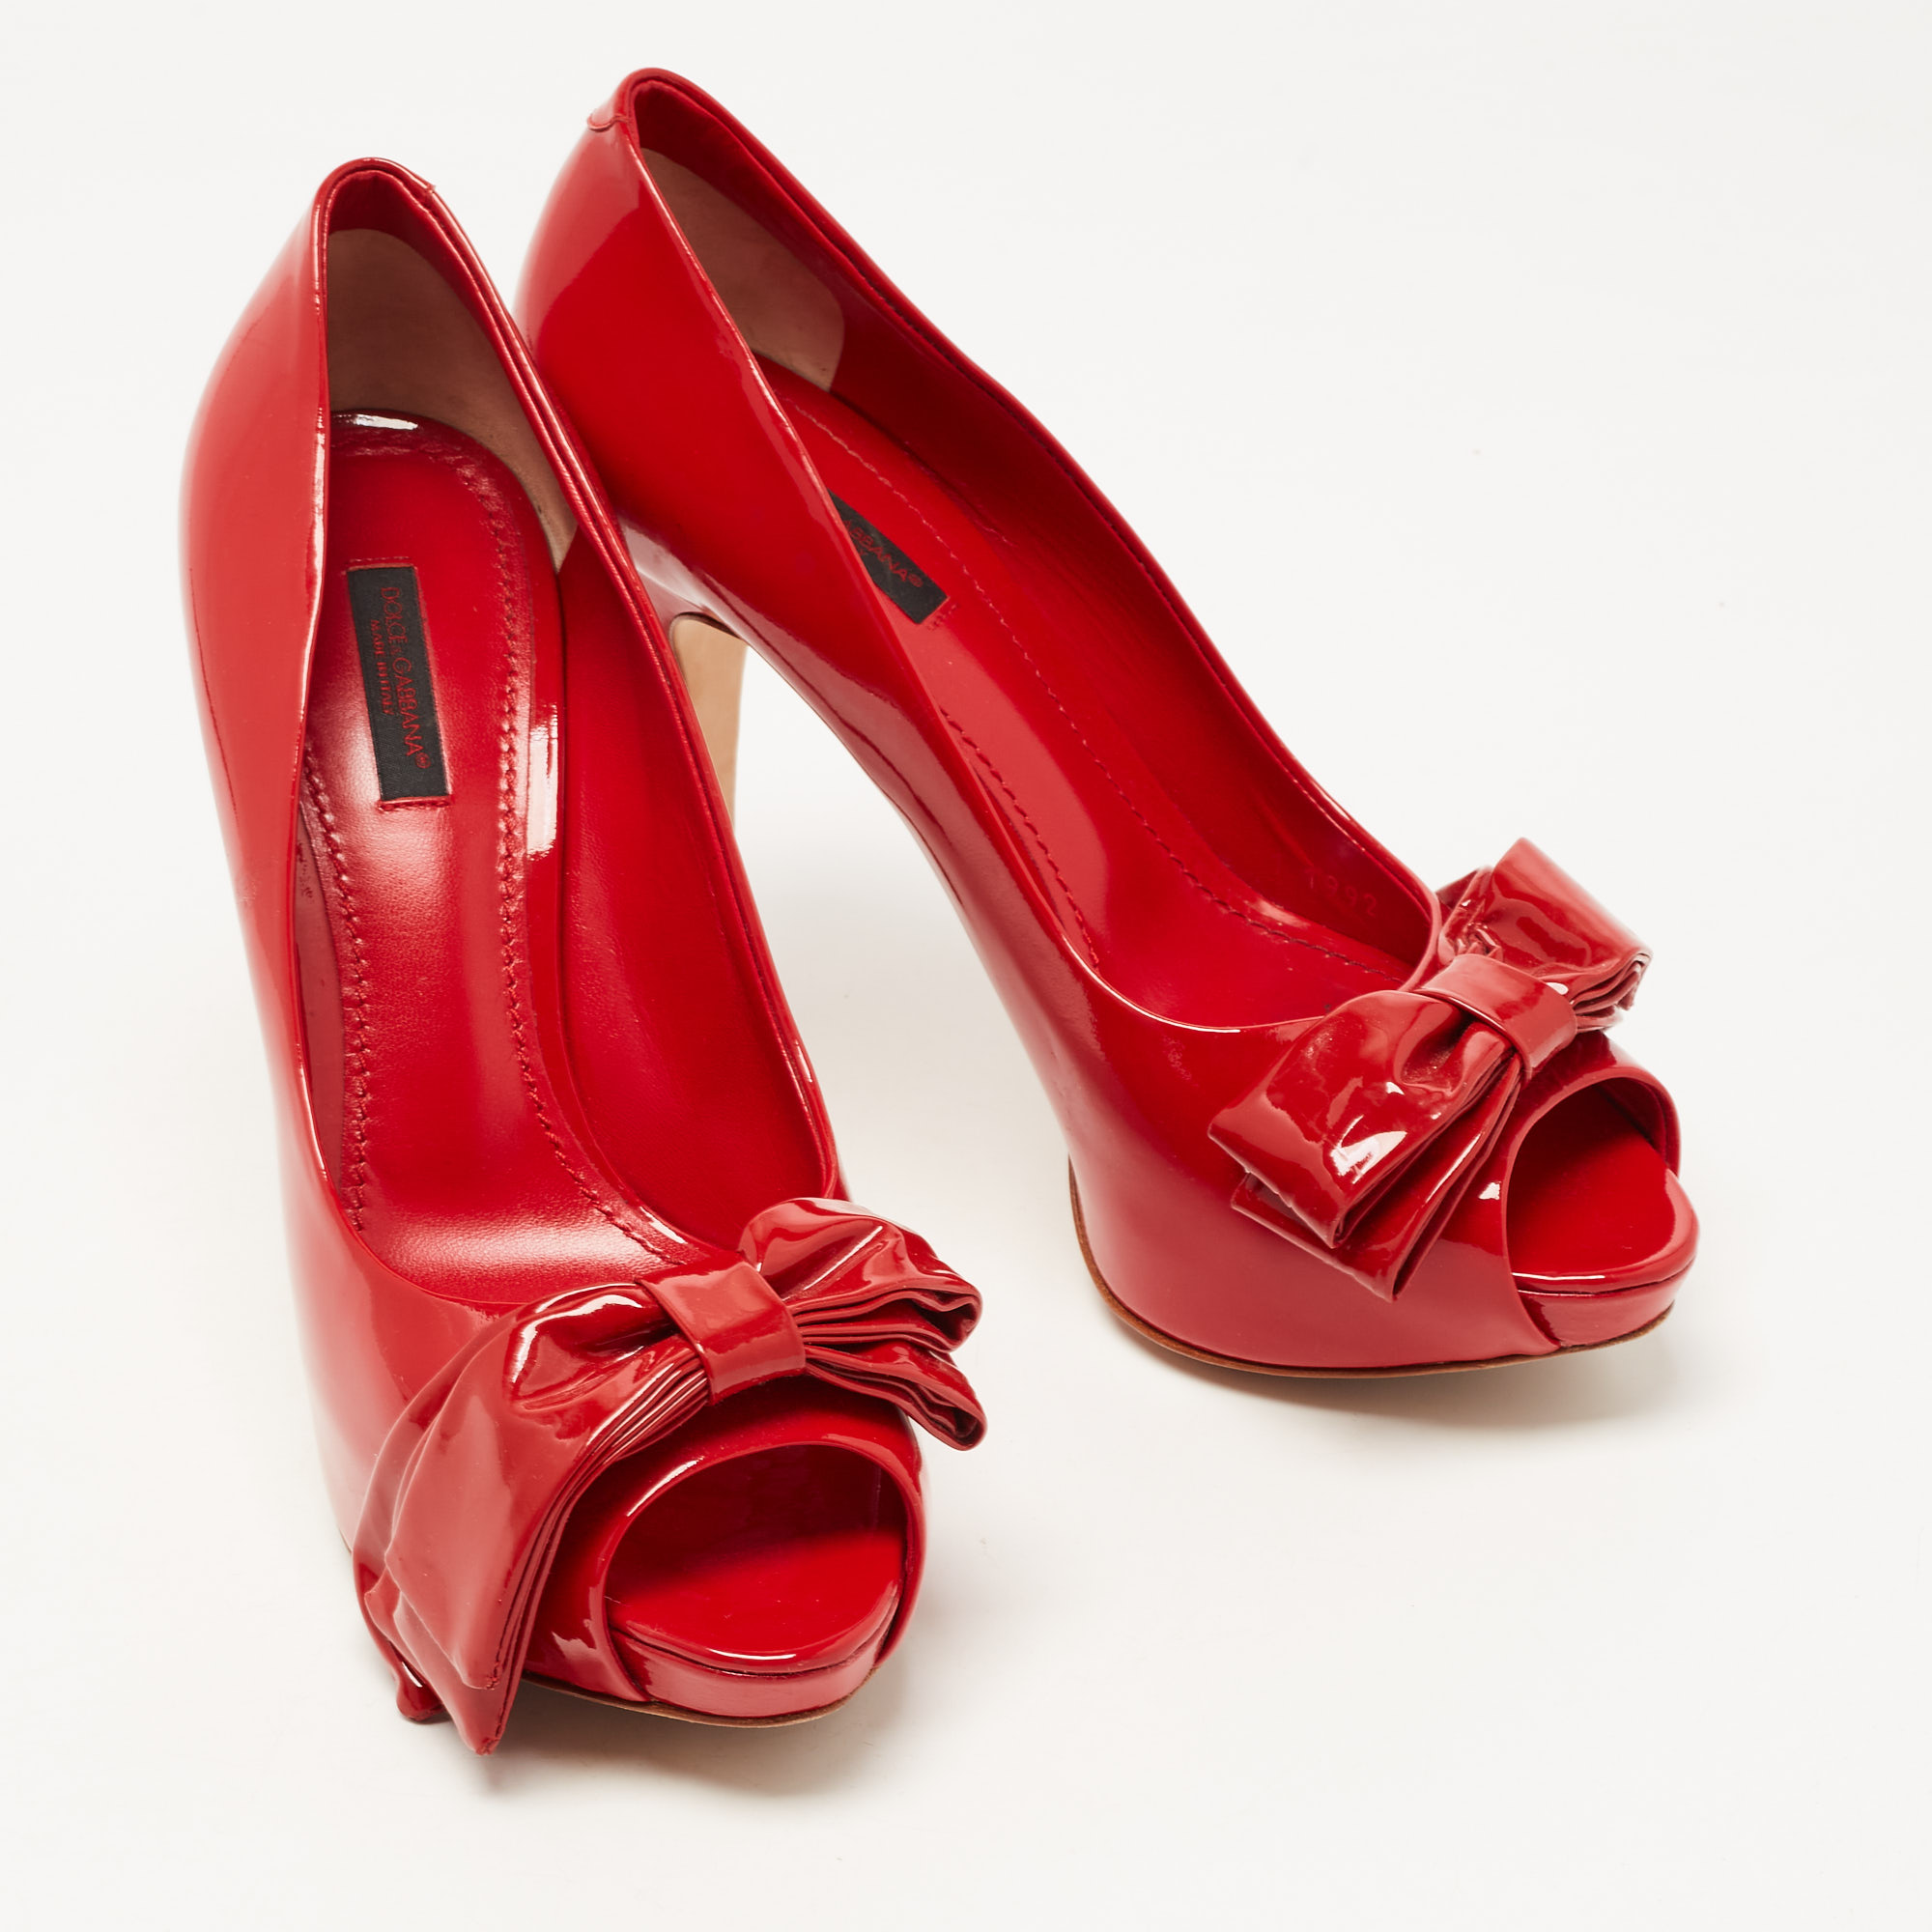 Dolce & Gabbana Red Patent Leather Bow Peep Toe Pumps Size 38.5